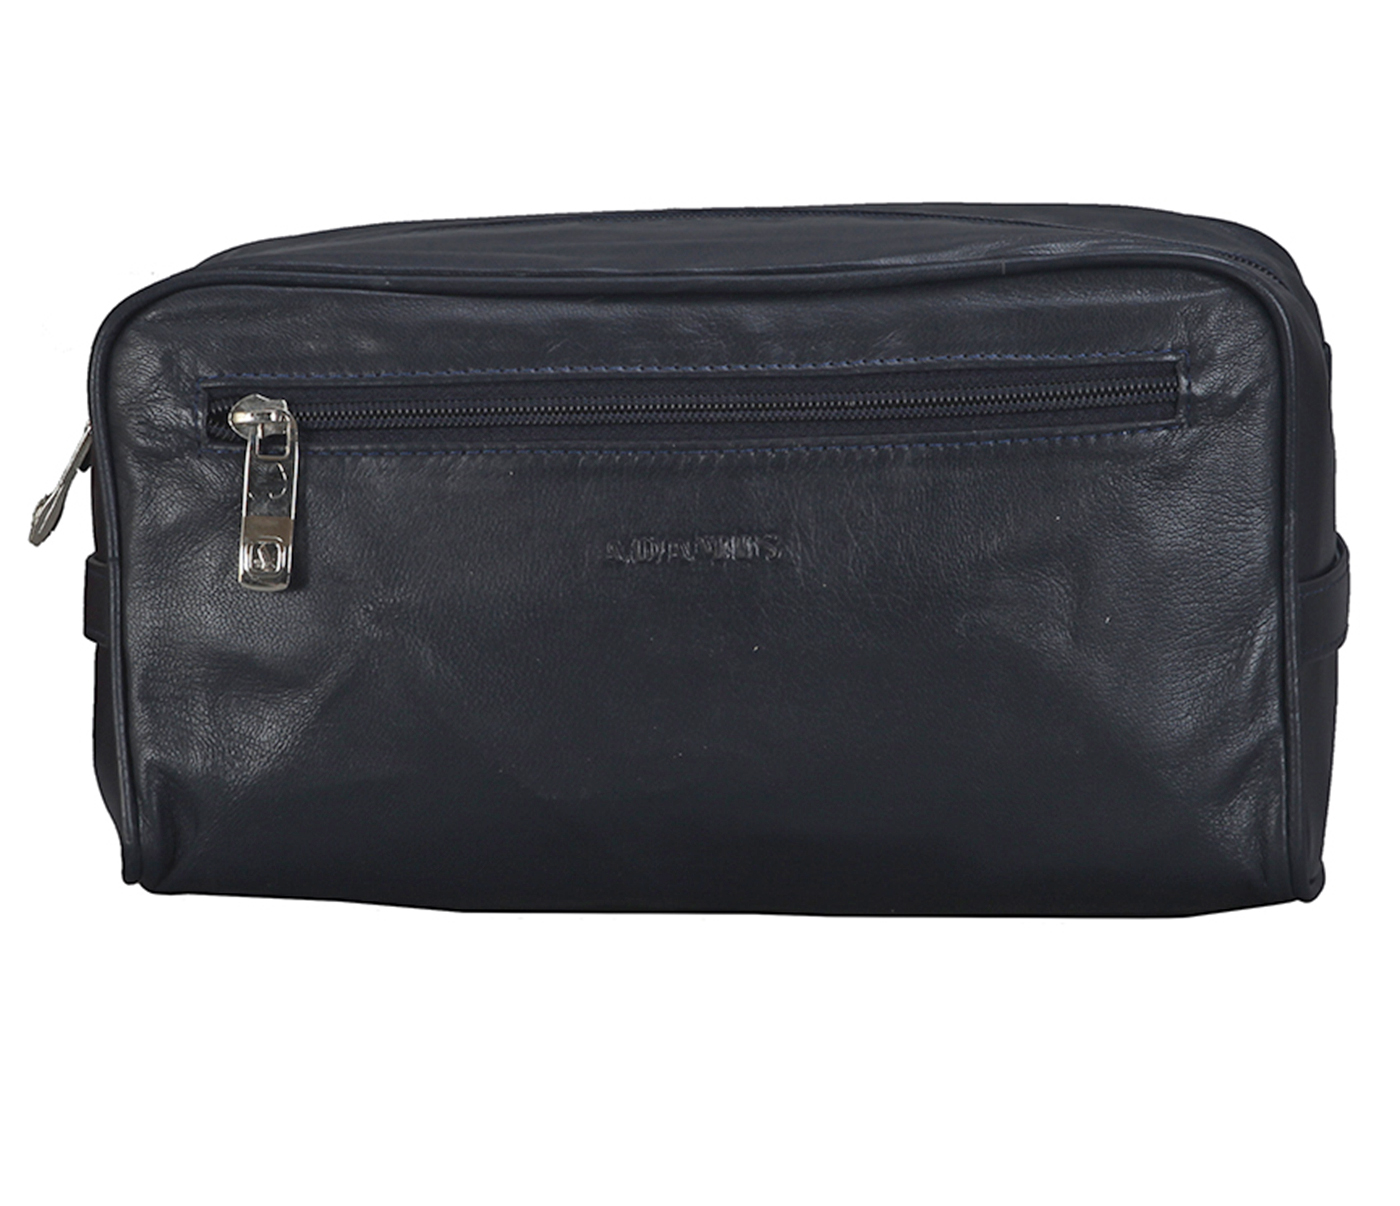 SC1--Unisex Wash & Toiletry travel Bag in Genuine Leather - Black